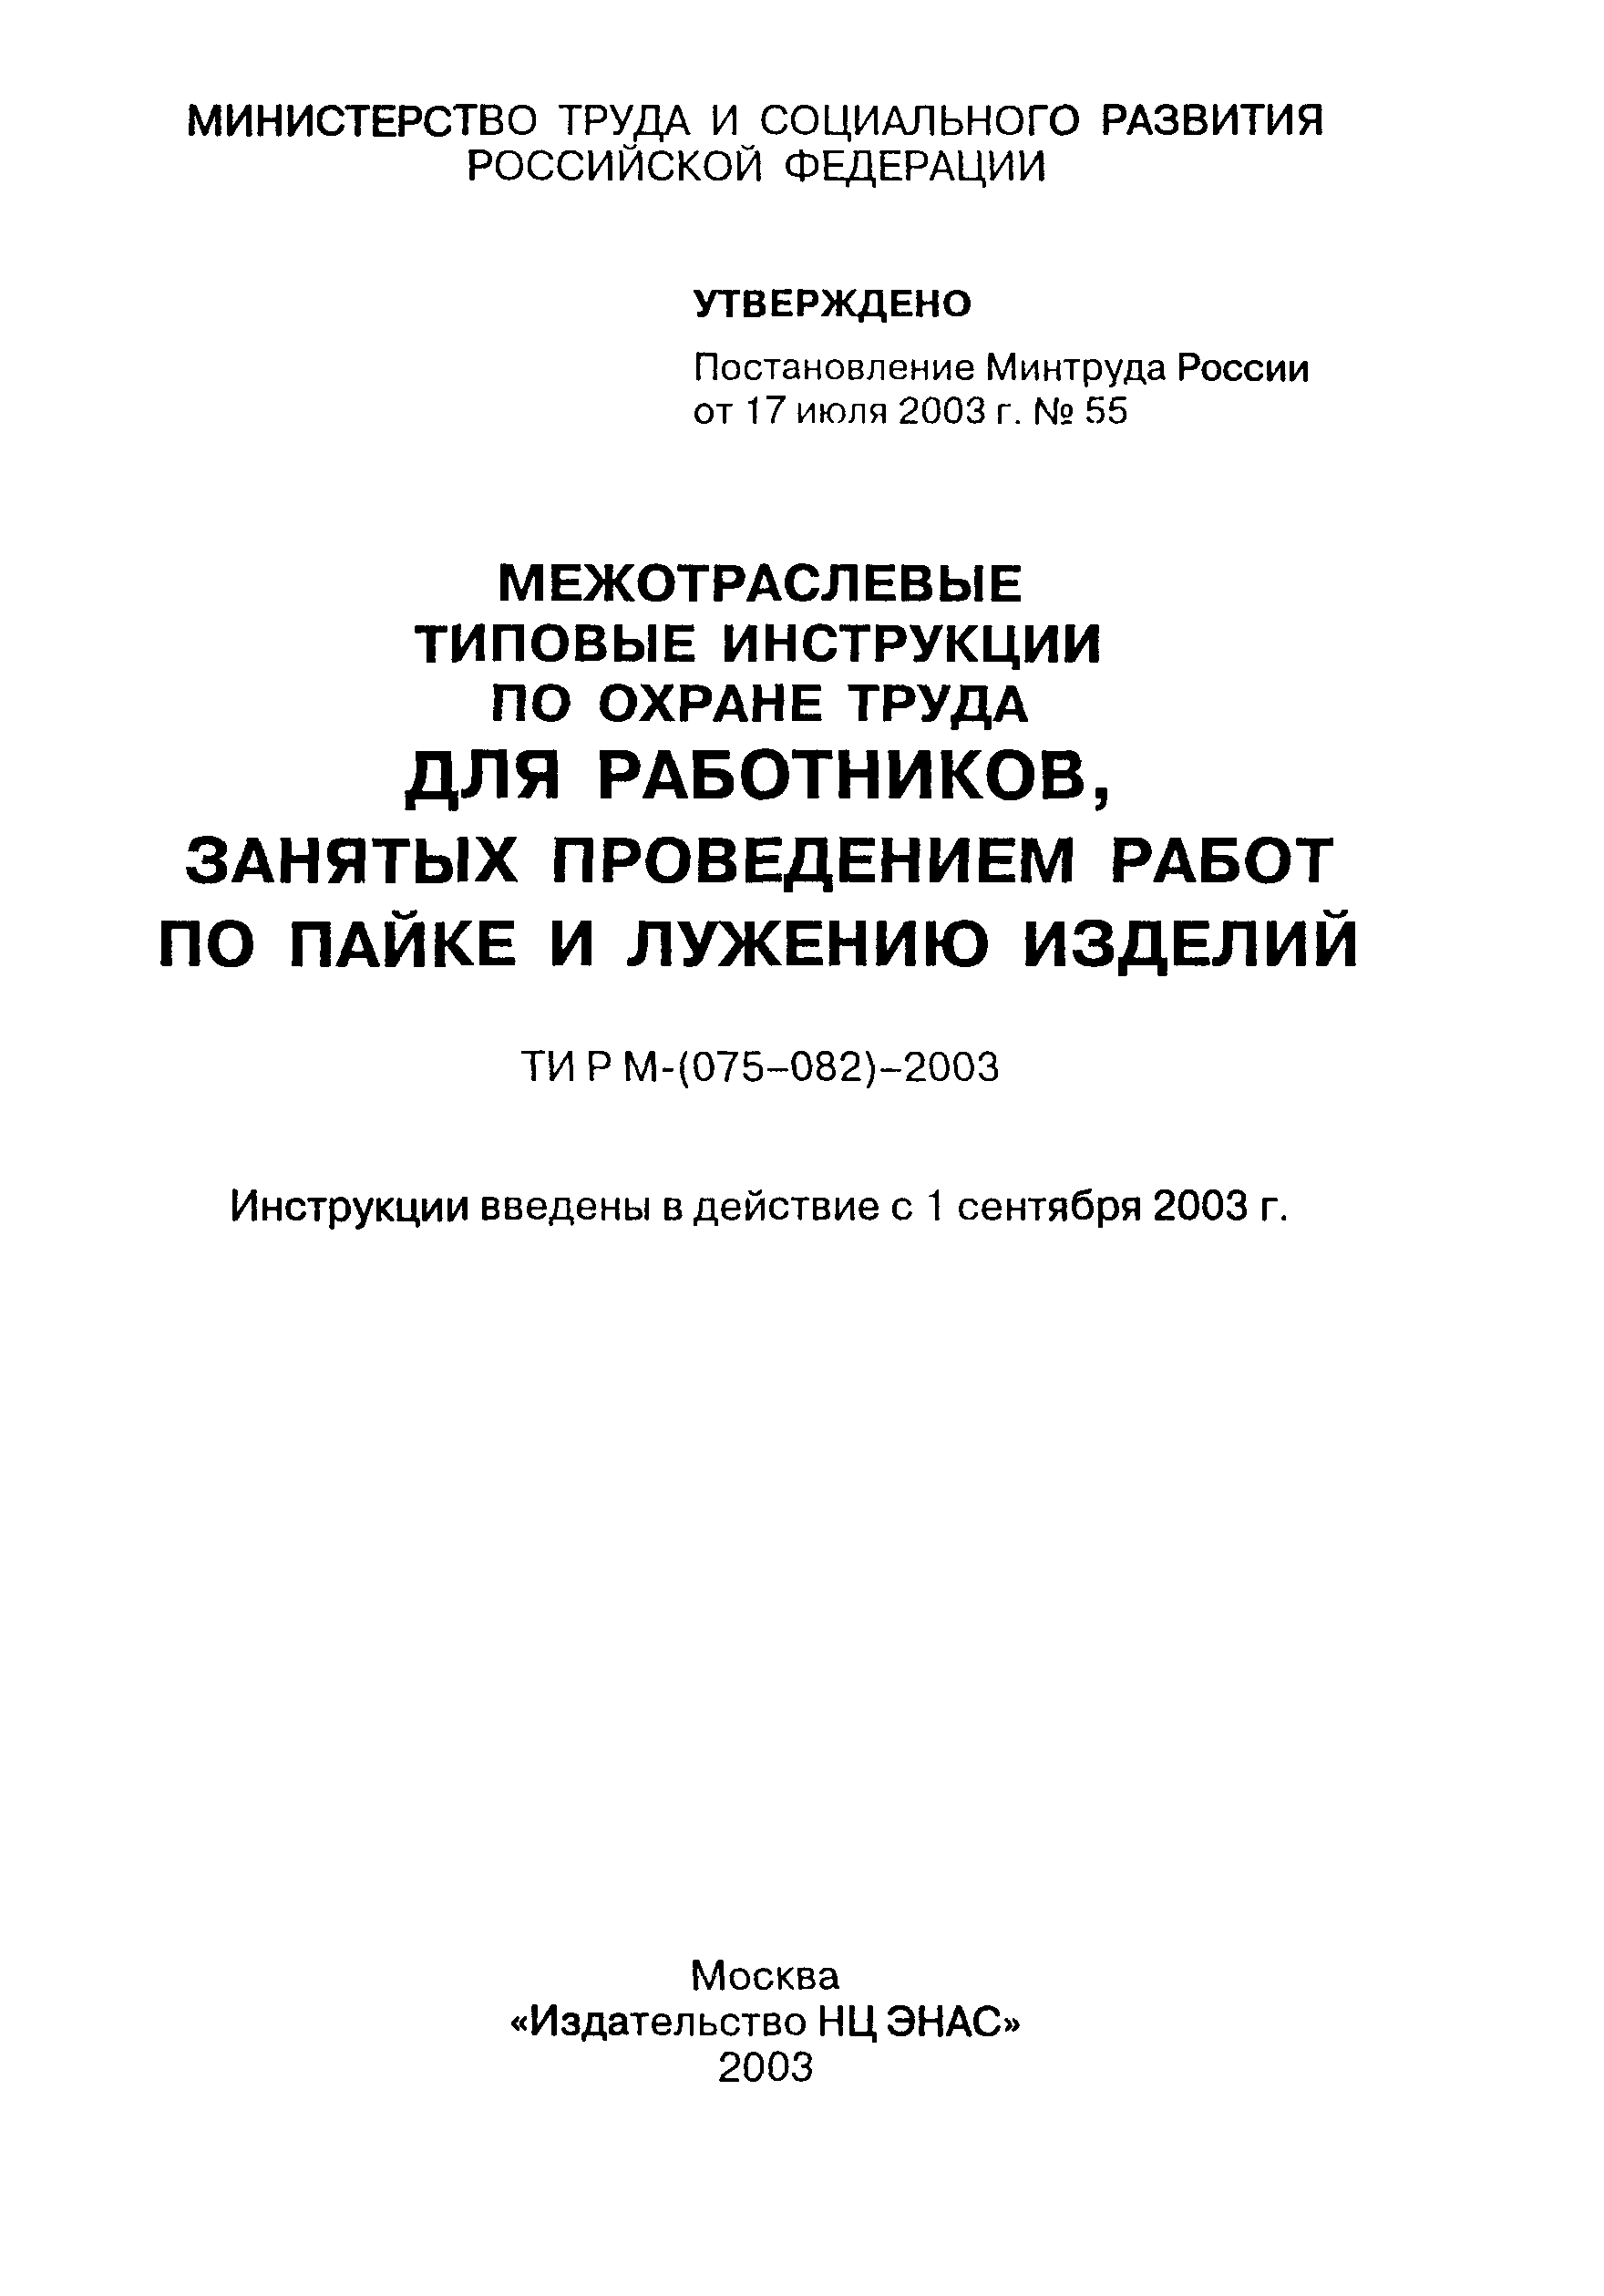 ТИ Р М-080-2003